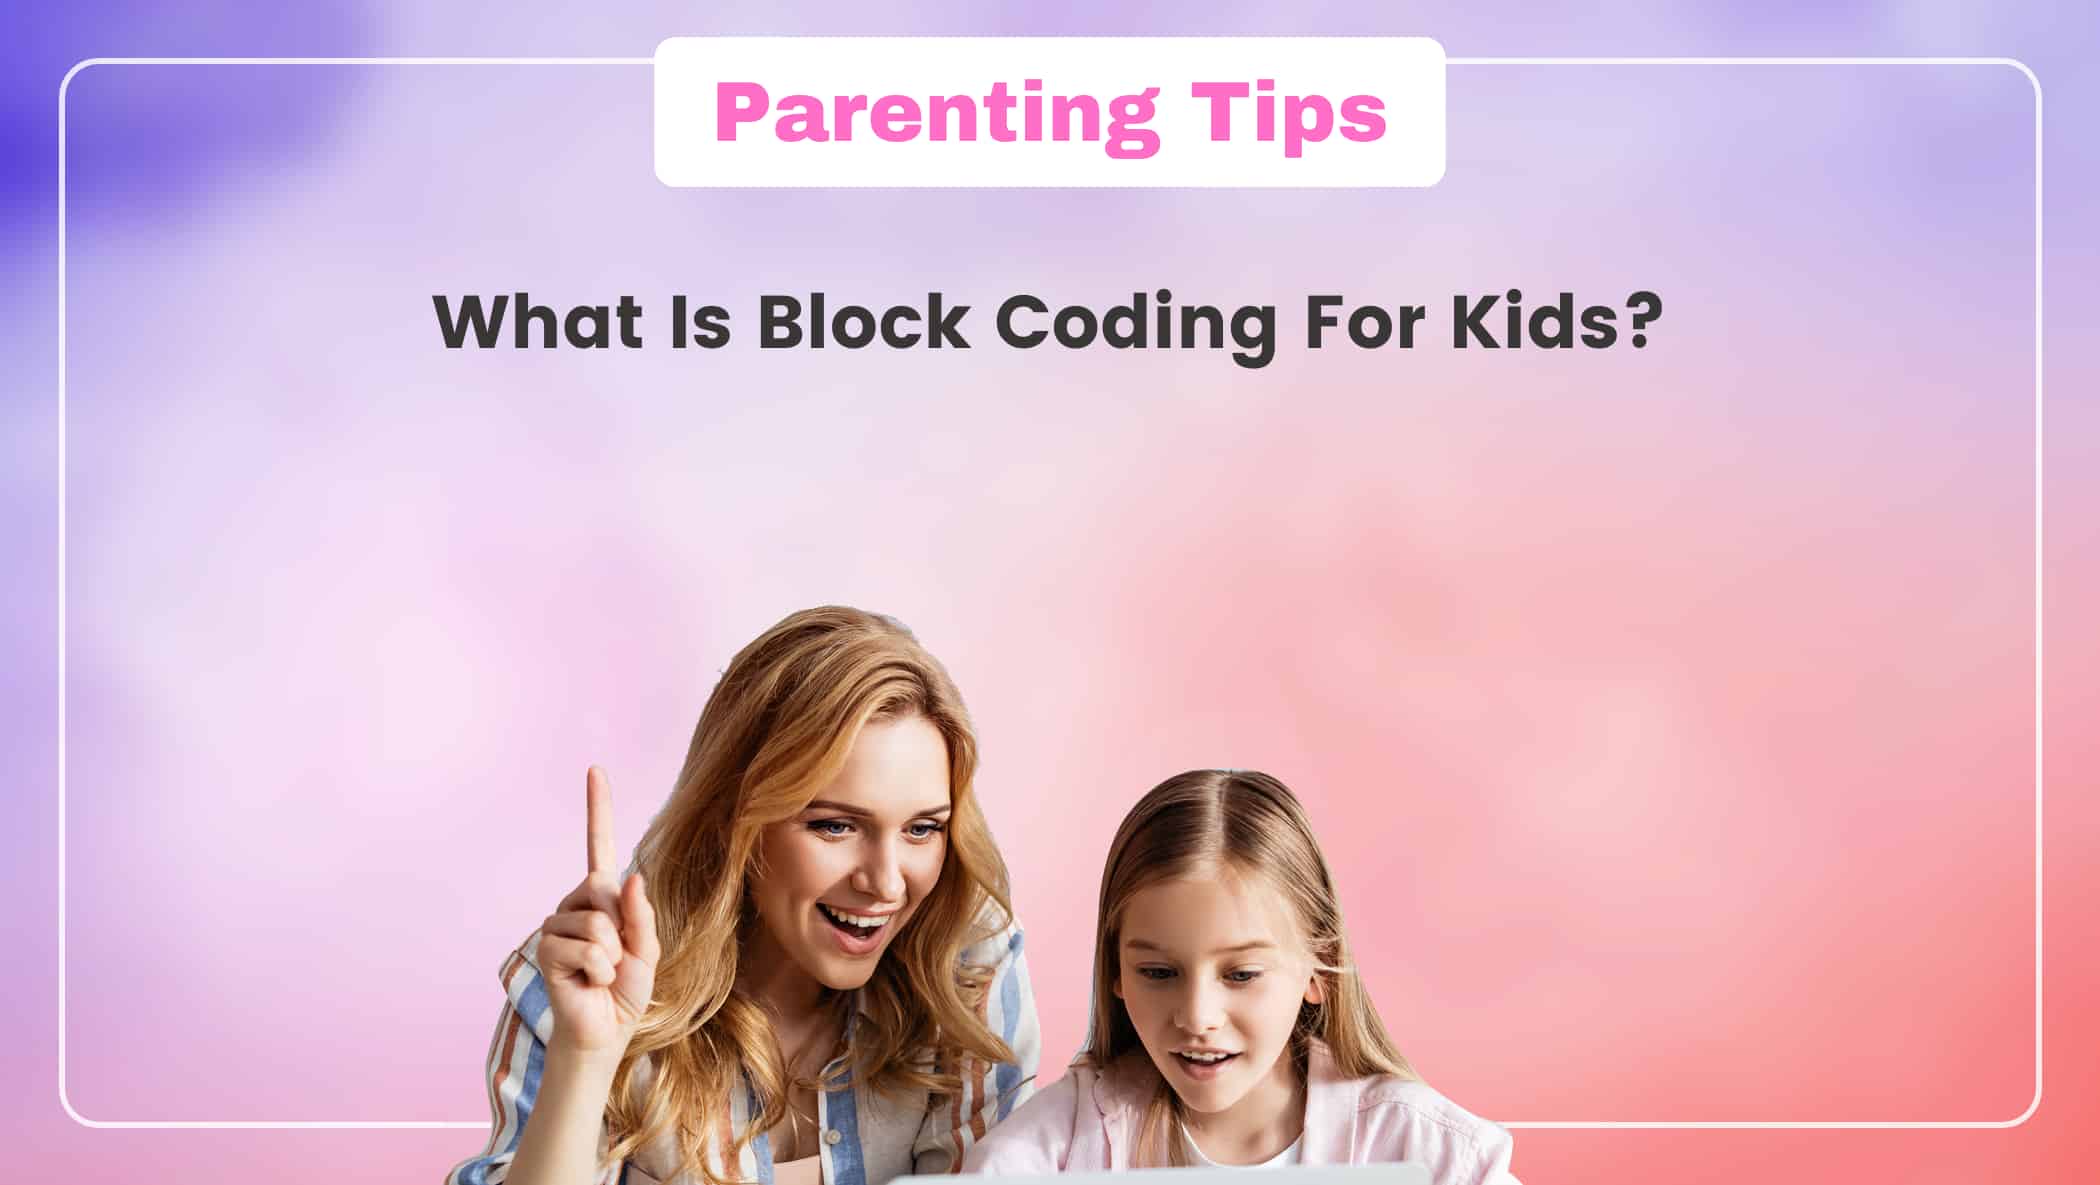 What Is Block Coding For Kids Image